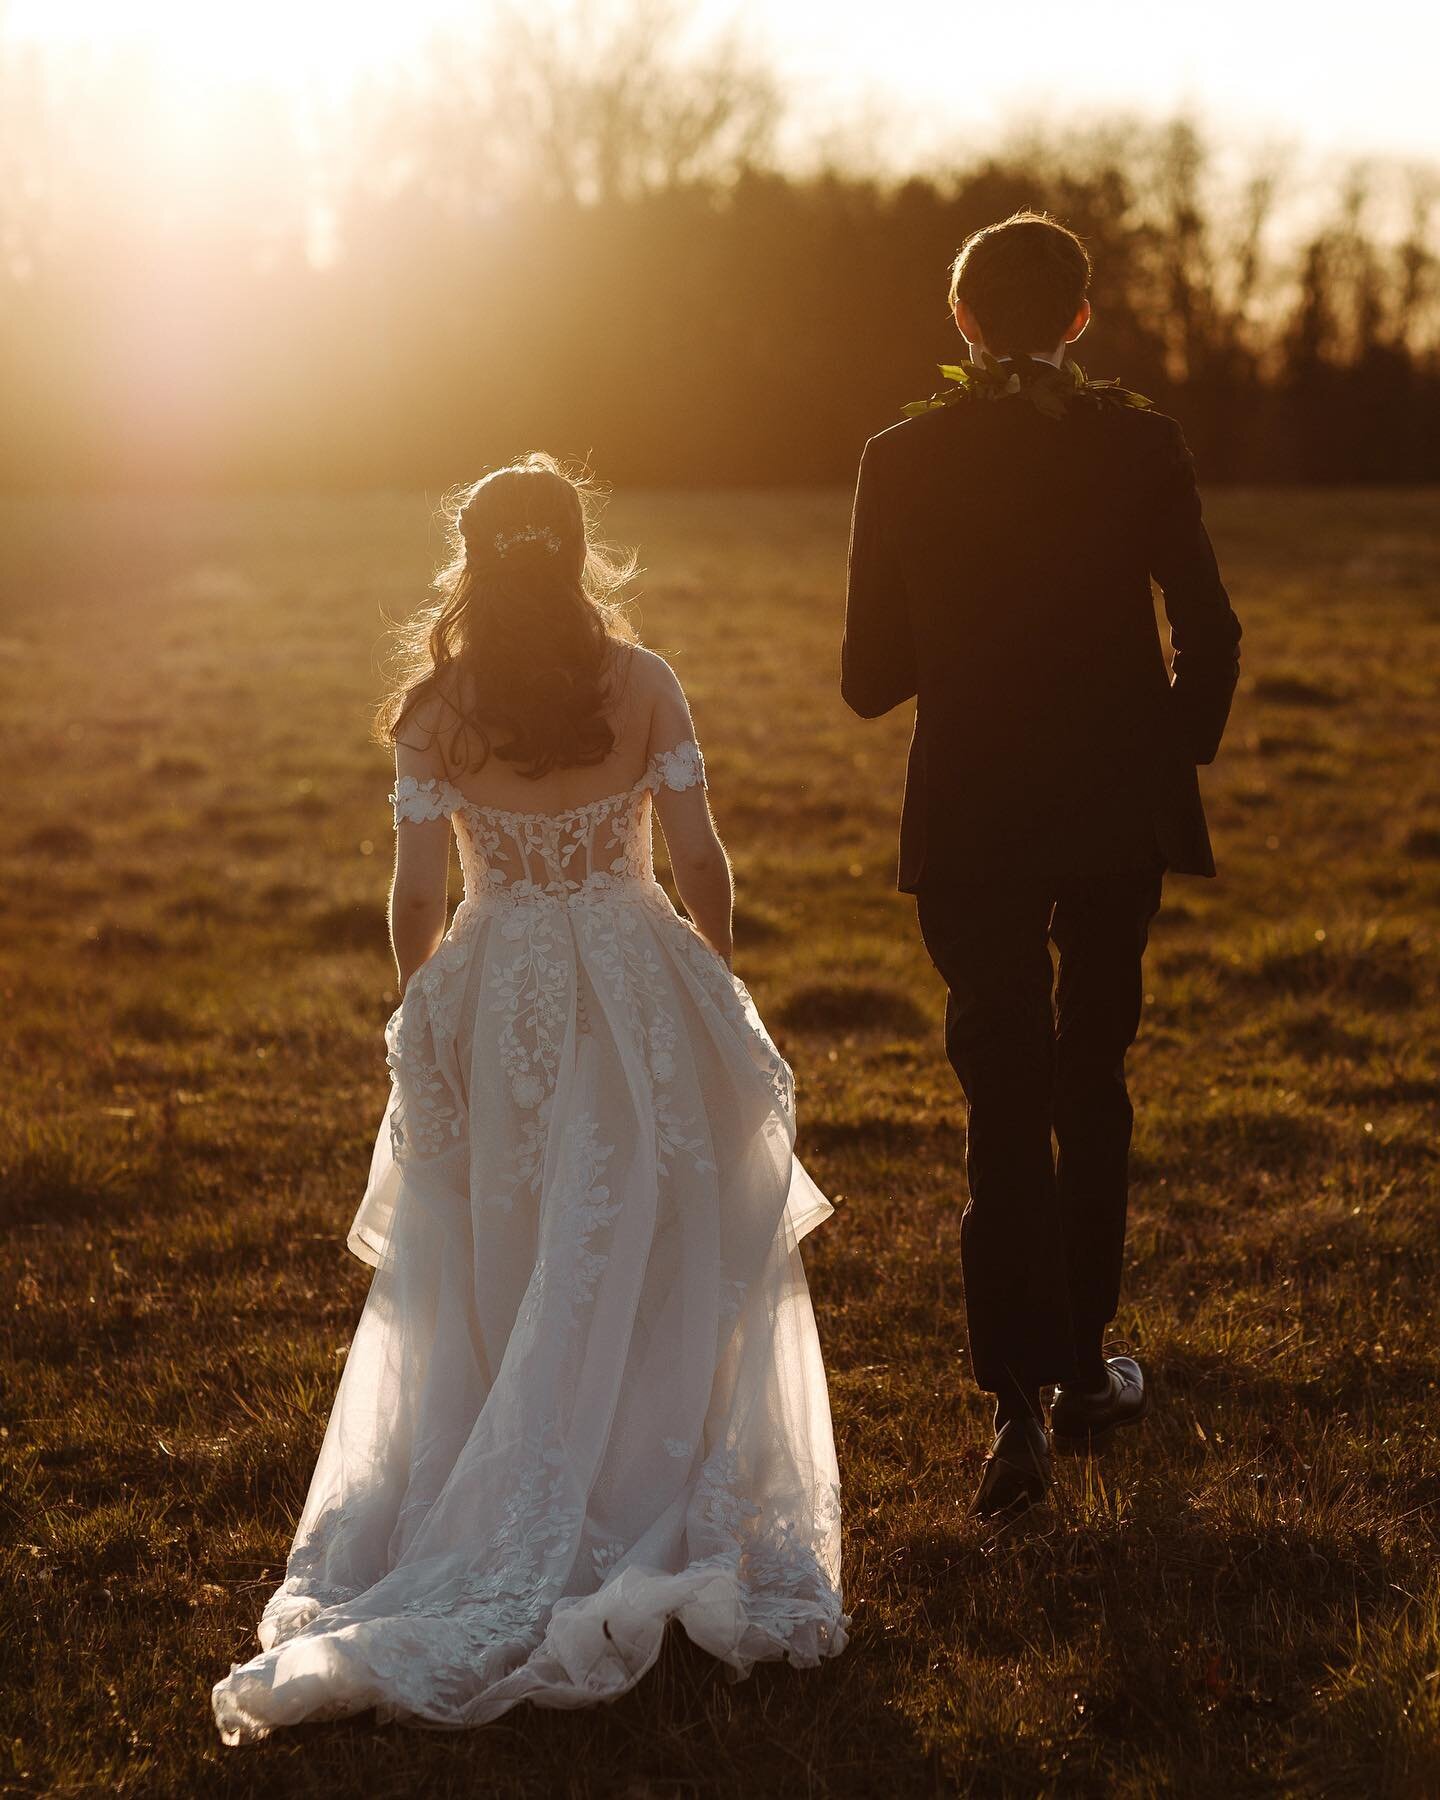 Kimi &amp; Zac&rsquo;s March Ohio wedding was a dream come true 💫 Bathed in golden hour&rsquo;s glow, their joy radiated against the stunning backdrop of Jorgensen Farms. 

Wishing them a lifetime of happiness, deeper and more enduring than the rays